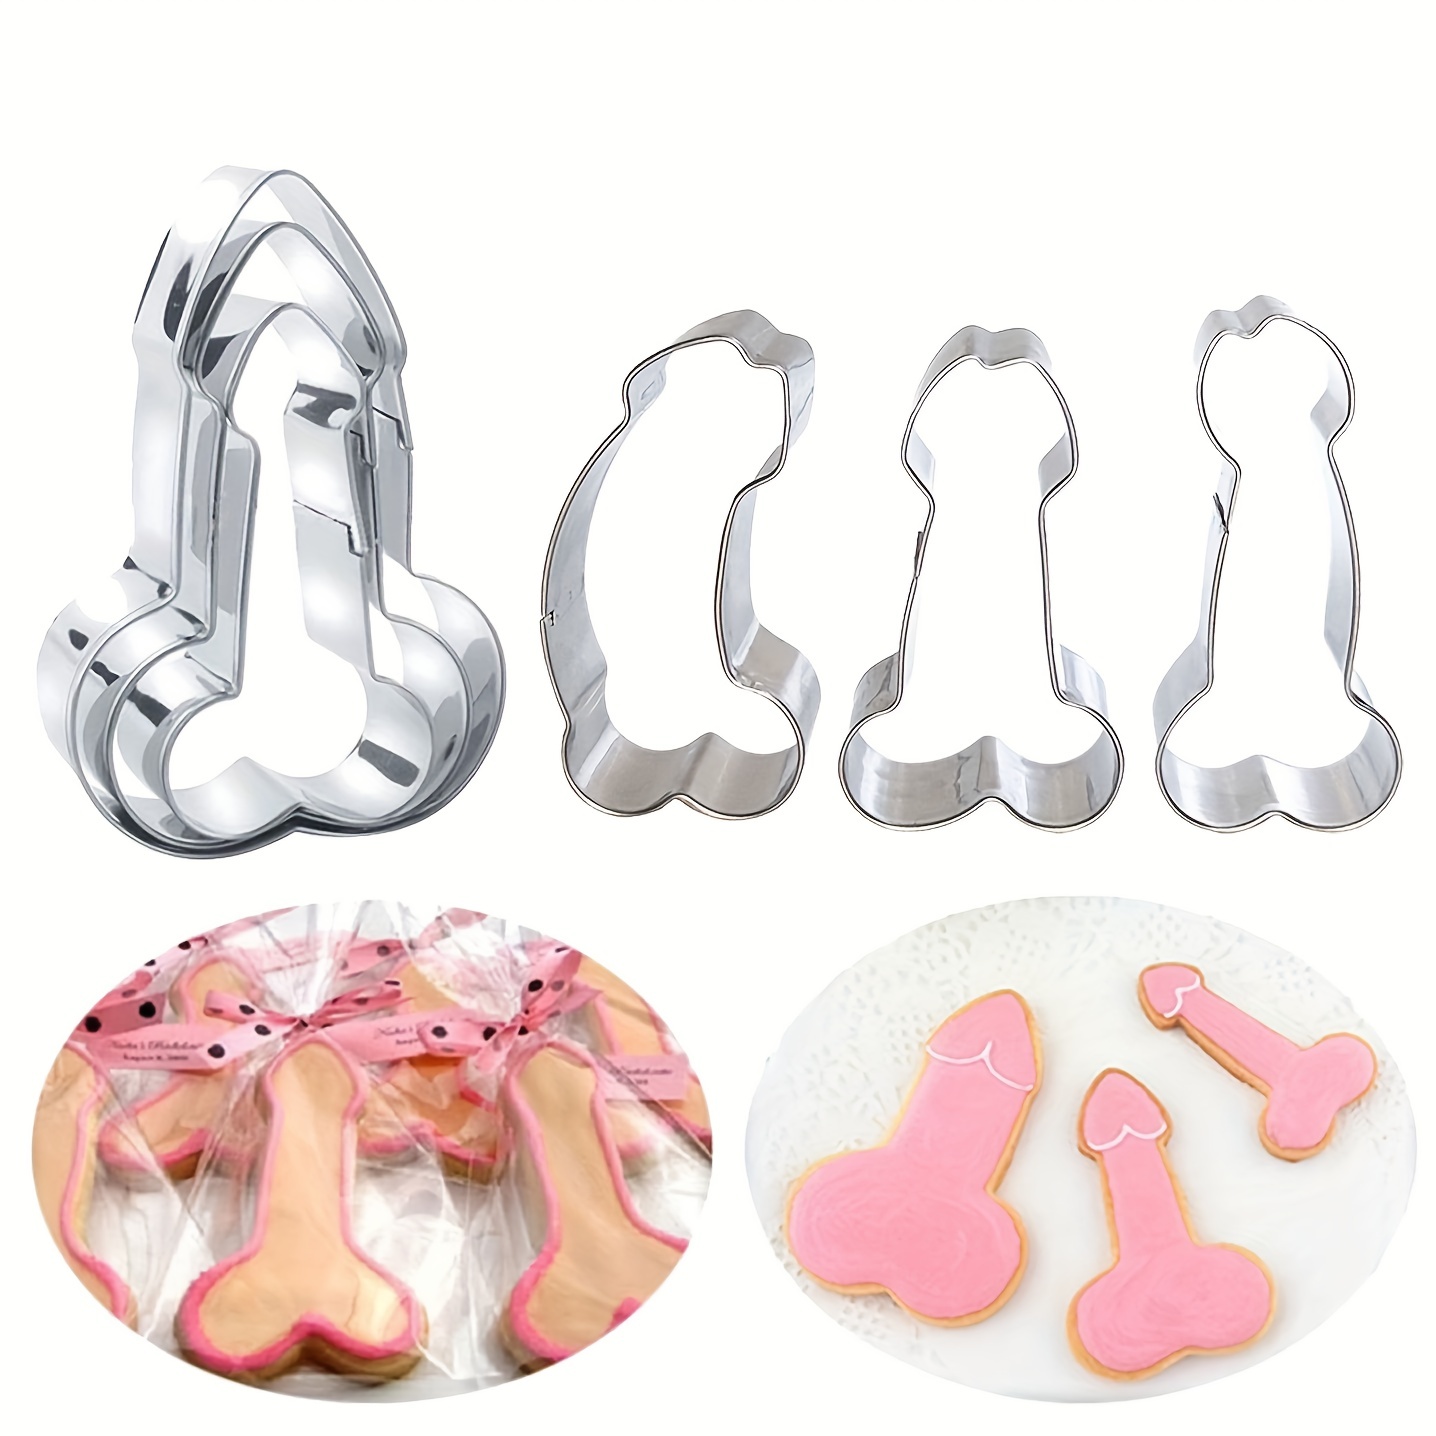 Large bachelorette Party Silicone Penis Cake Mold Chocolate 10 Dick Shape  Adult